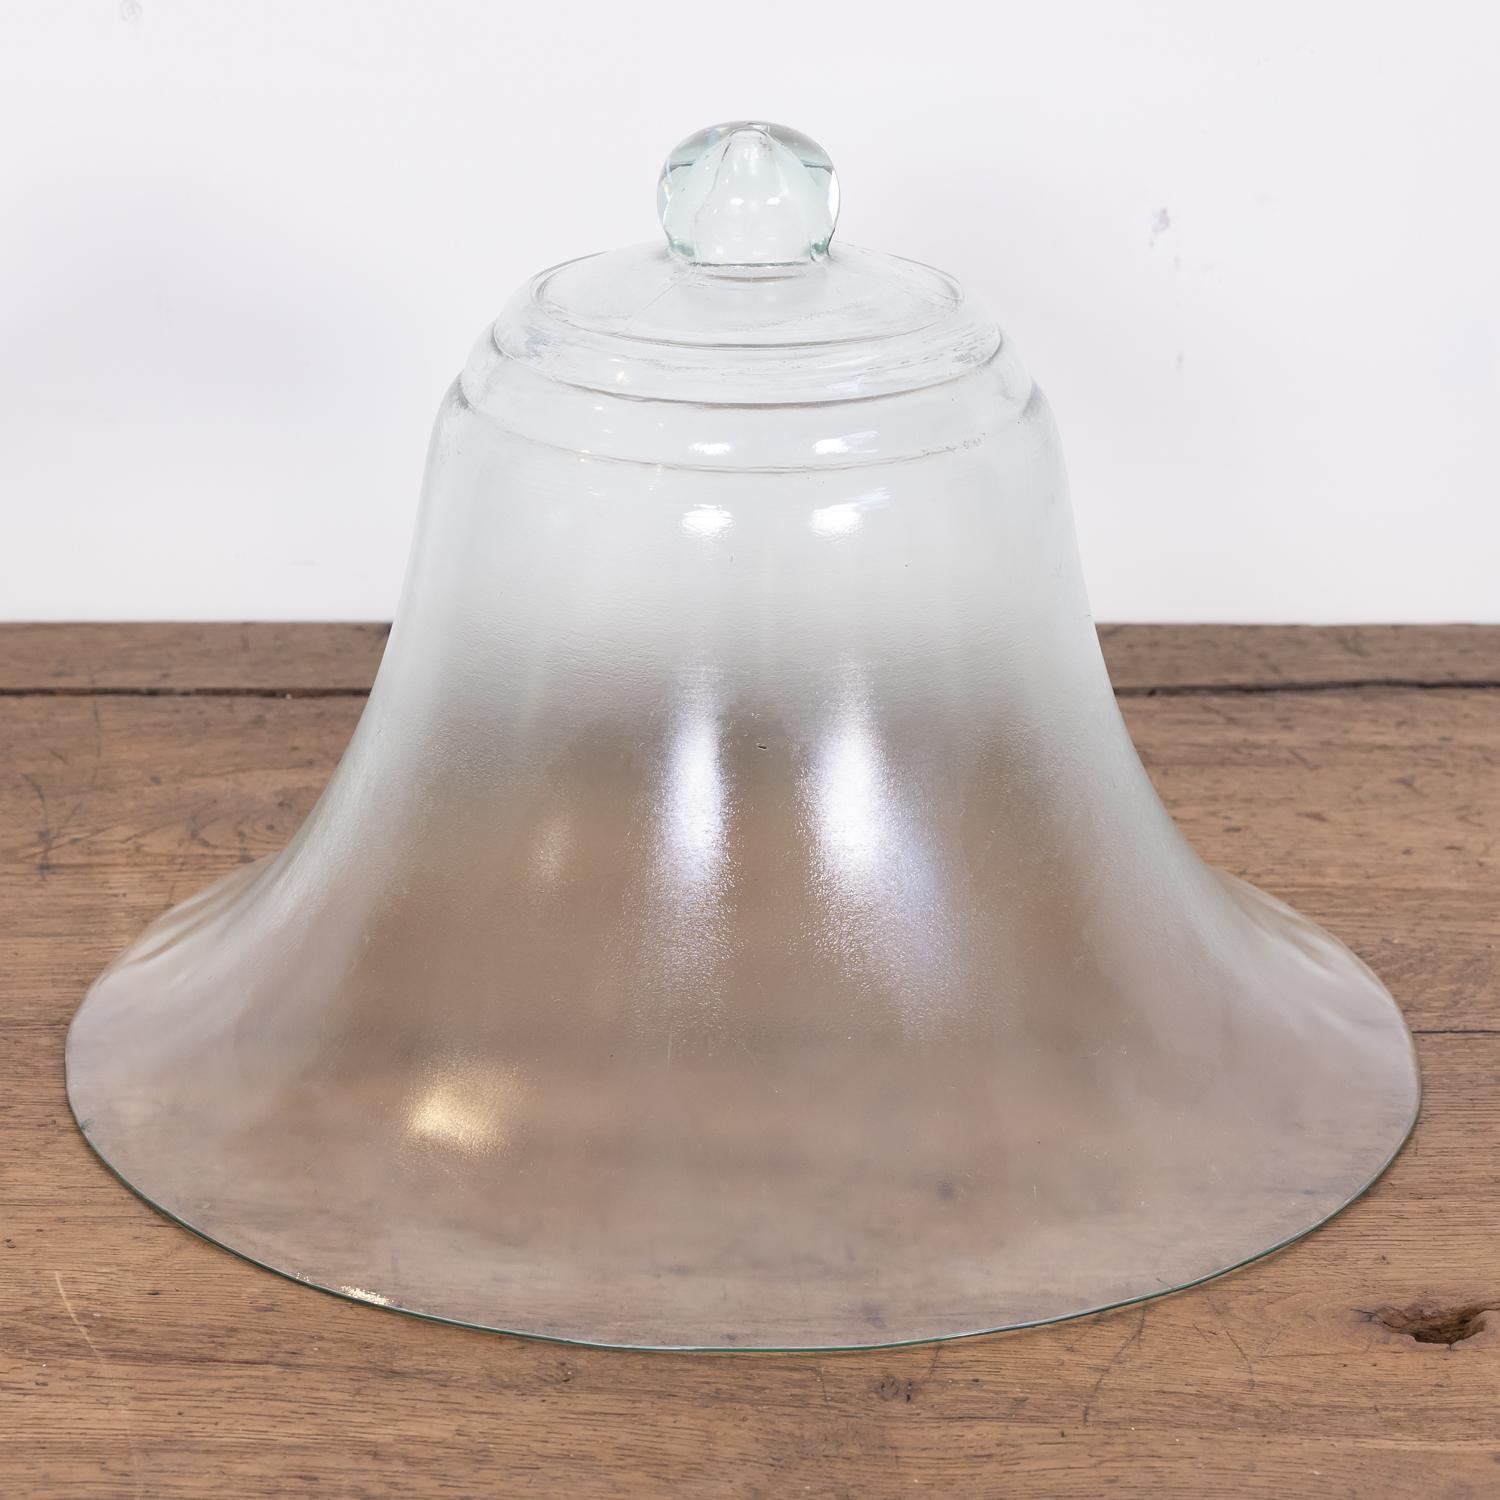 Large 19th century antique French bell shaped garden cloche formed as a single piece of clear glass with a solid knob handle, circa 1880s. Hand-blown from thick glass, it was designed to act as a small green house for lettuces and melons in the